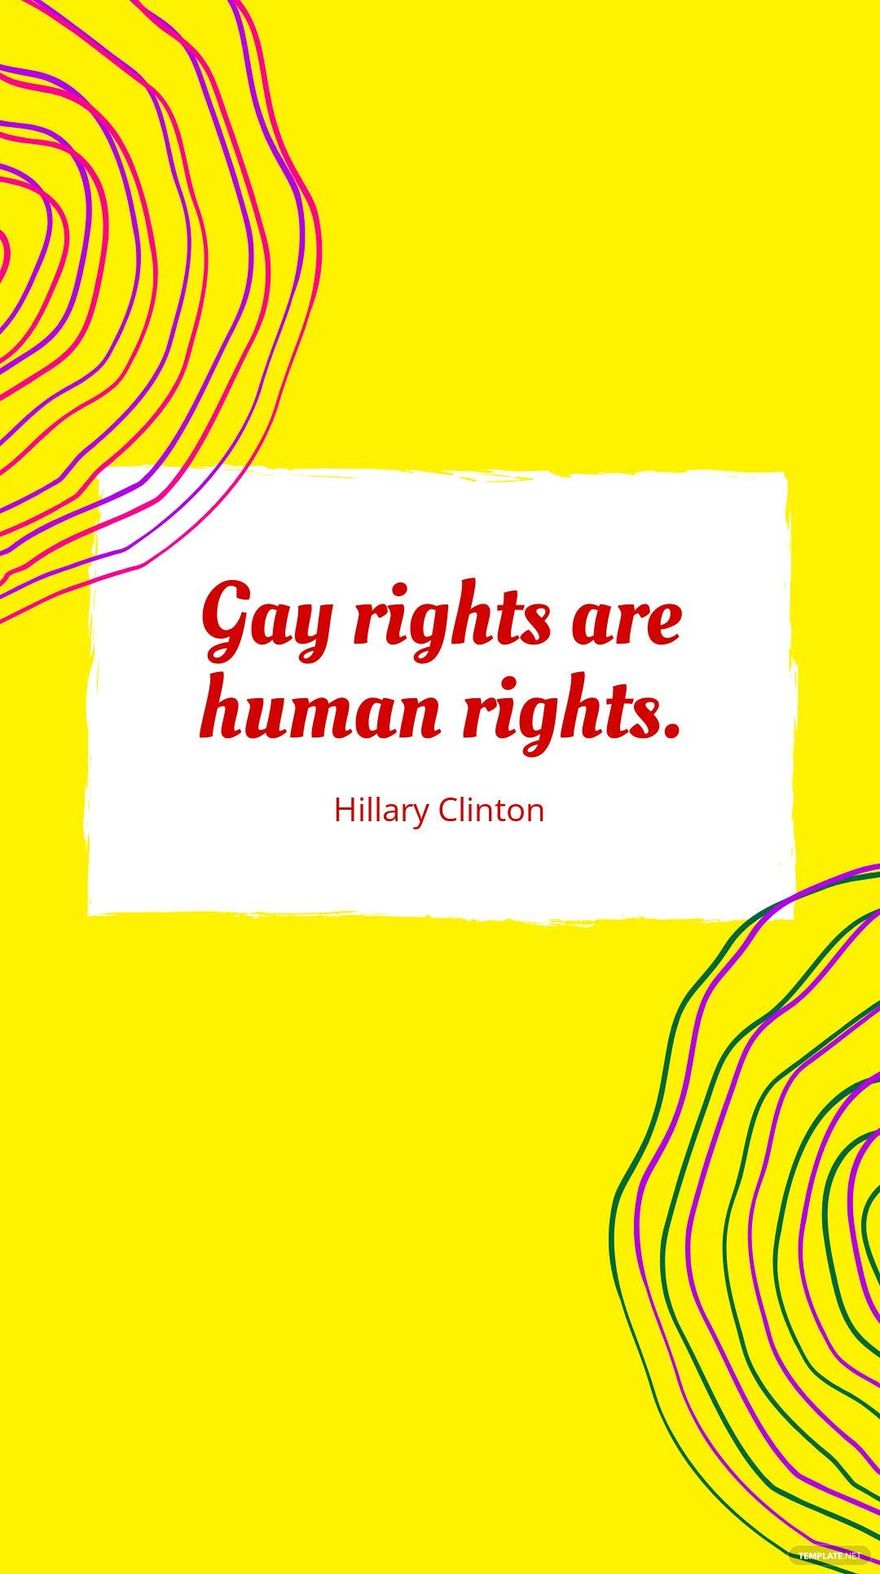 Free Hillary Clinton - Gay rights are human rights. in JPG